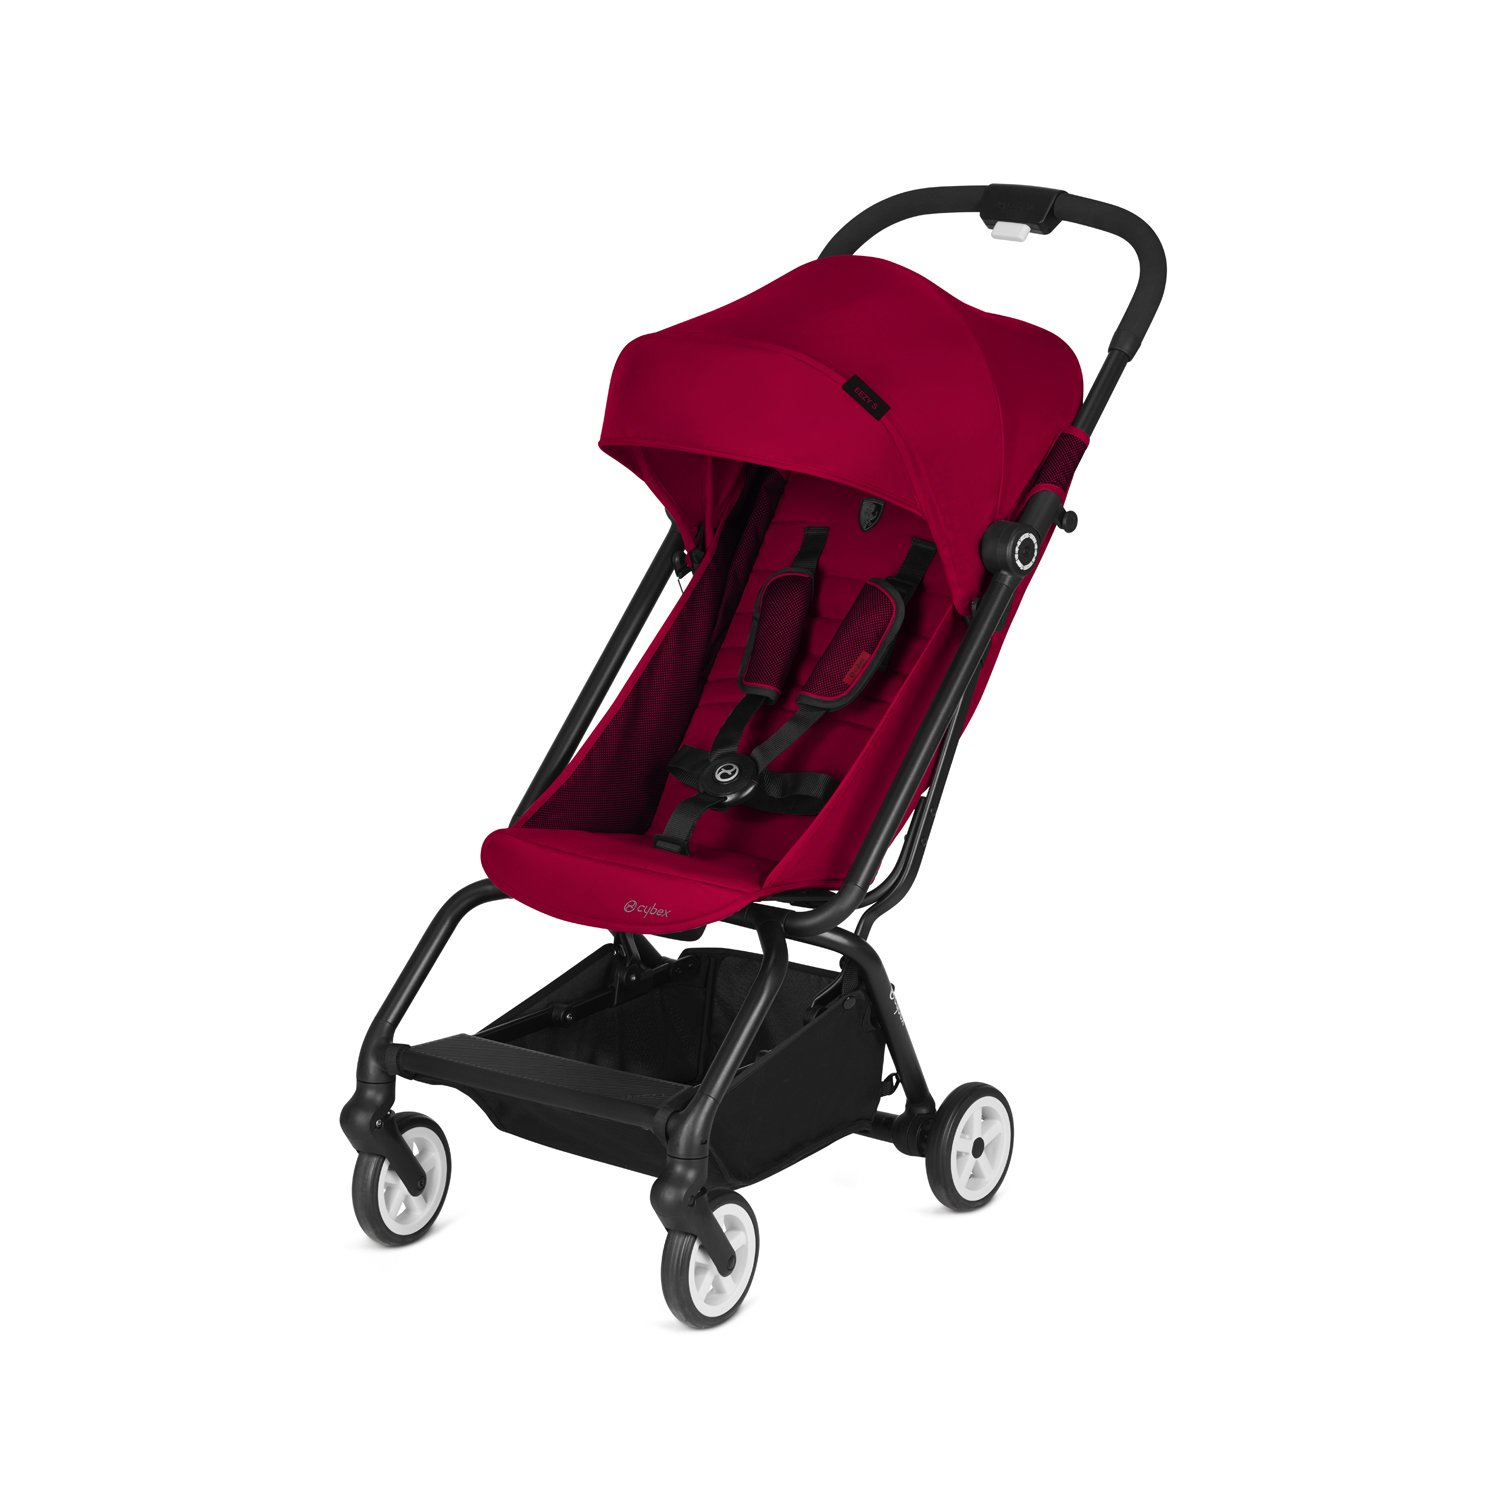 Cybex Gold Buggy, Eezy S, Buggy with One-Handed Folding Mechanism Ferrari collection